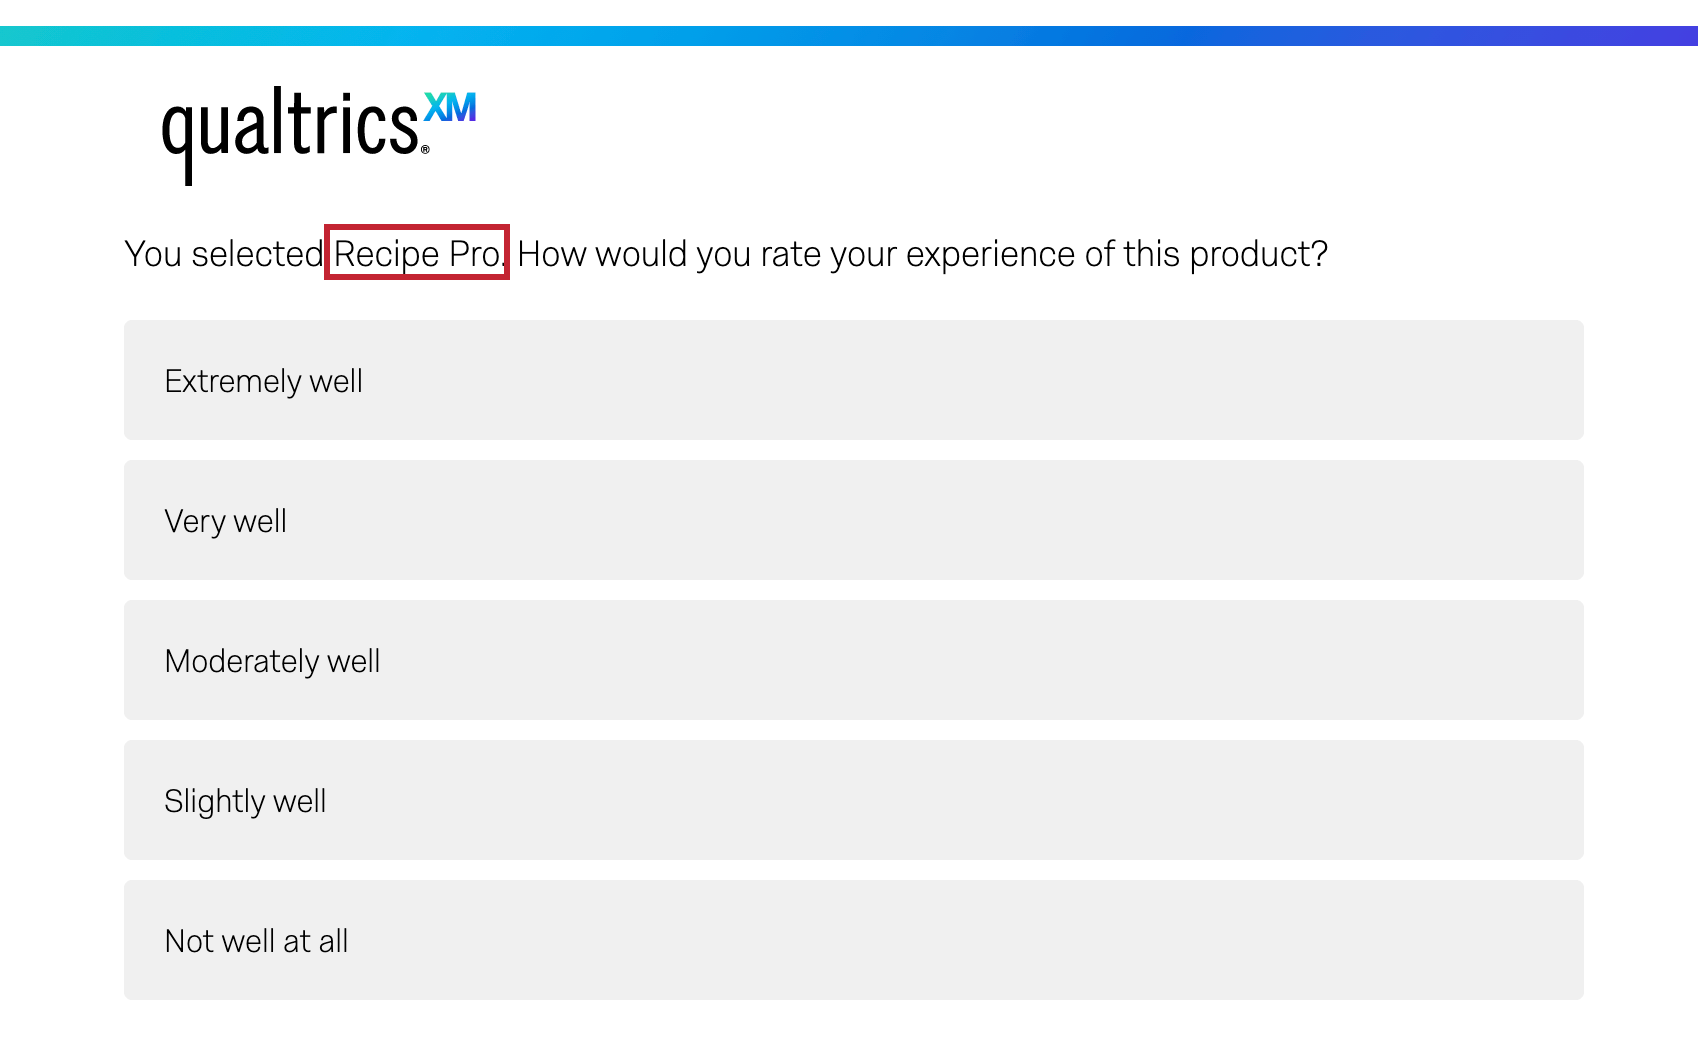 The same You selected question, but in an active survey, where the bracket placeholder (piped text) is replaced with the answer the respondent gave to the previous question